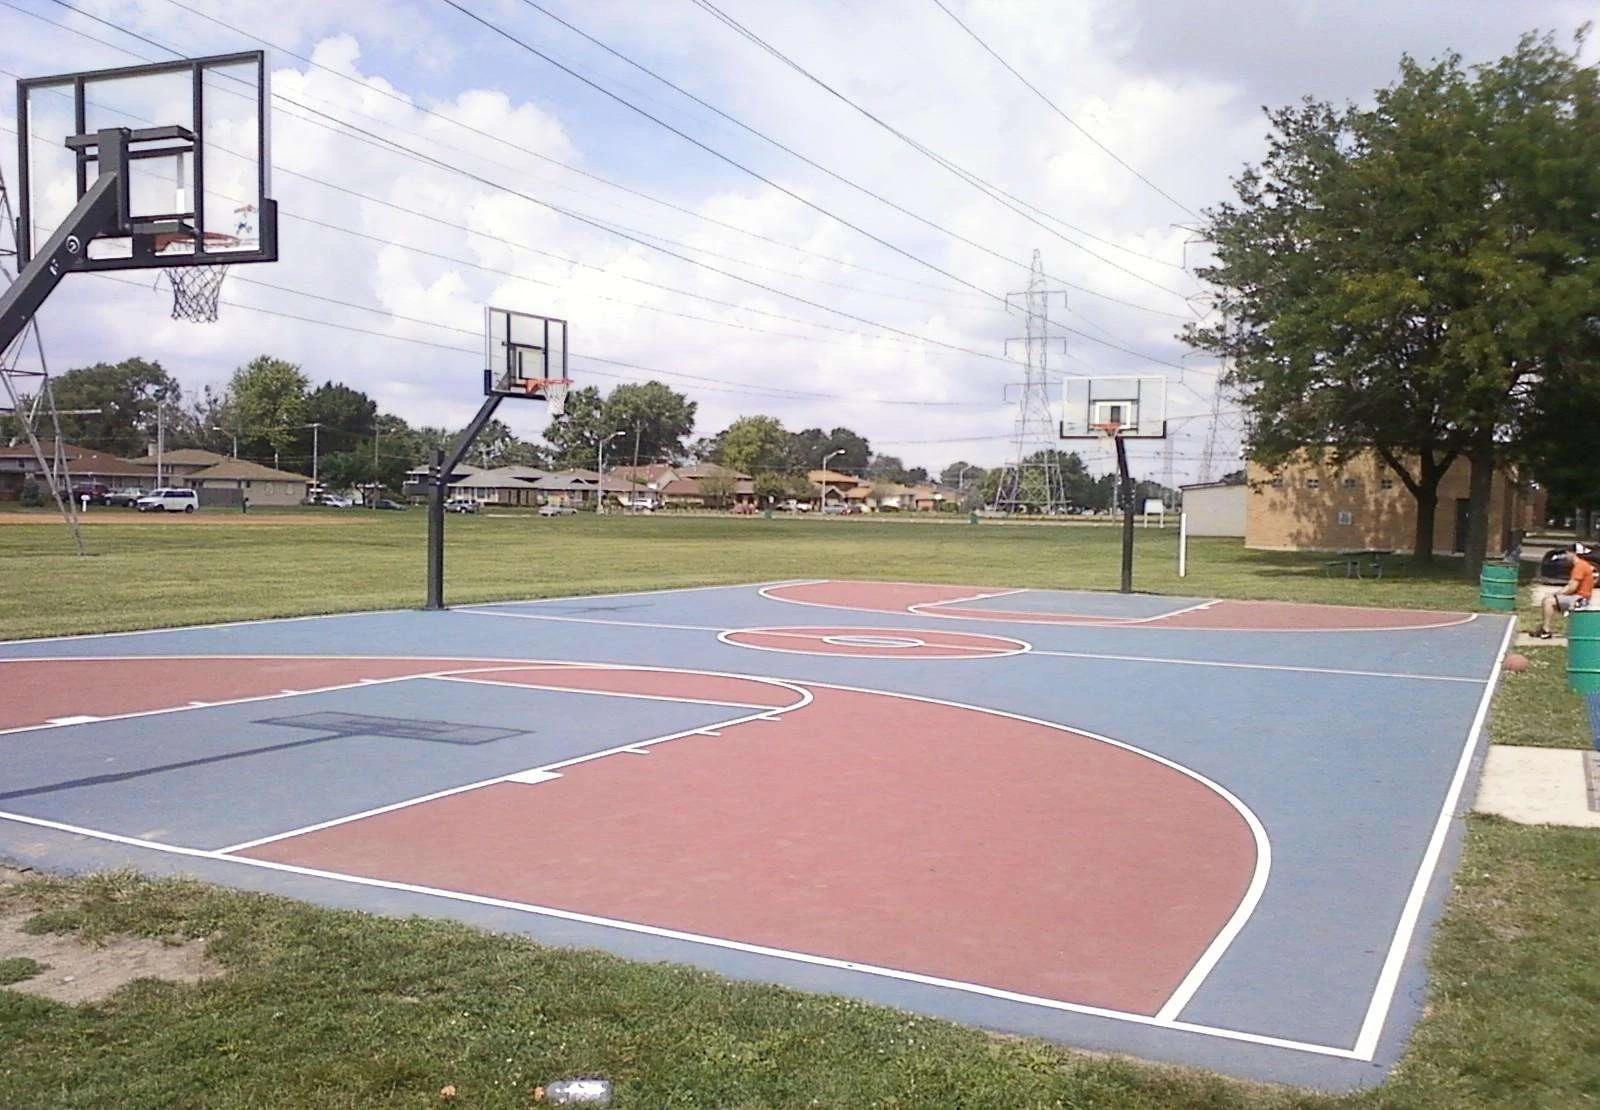 Burbank IL Basketball Court: Newcastle Park Courts of the World